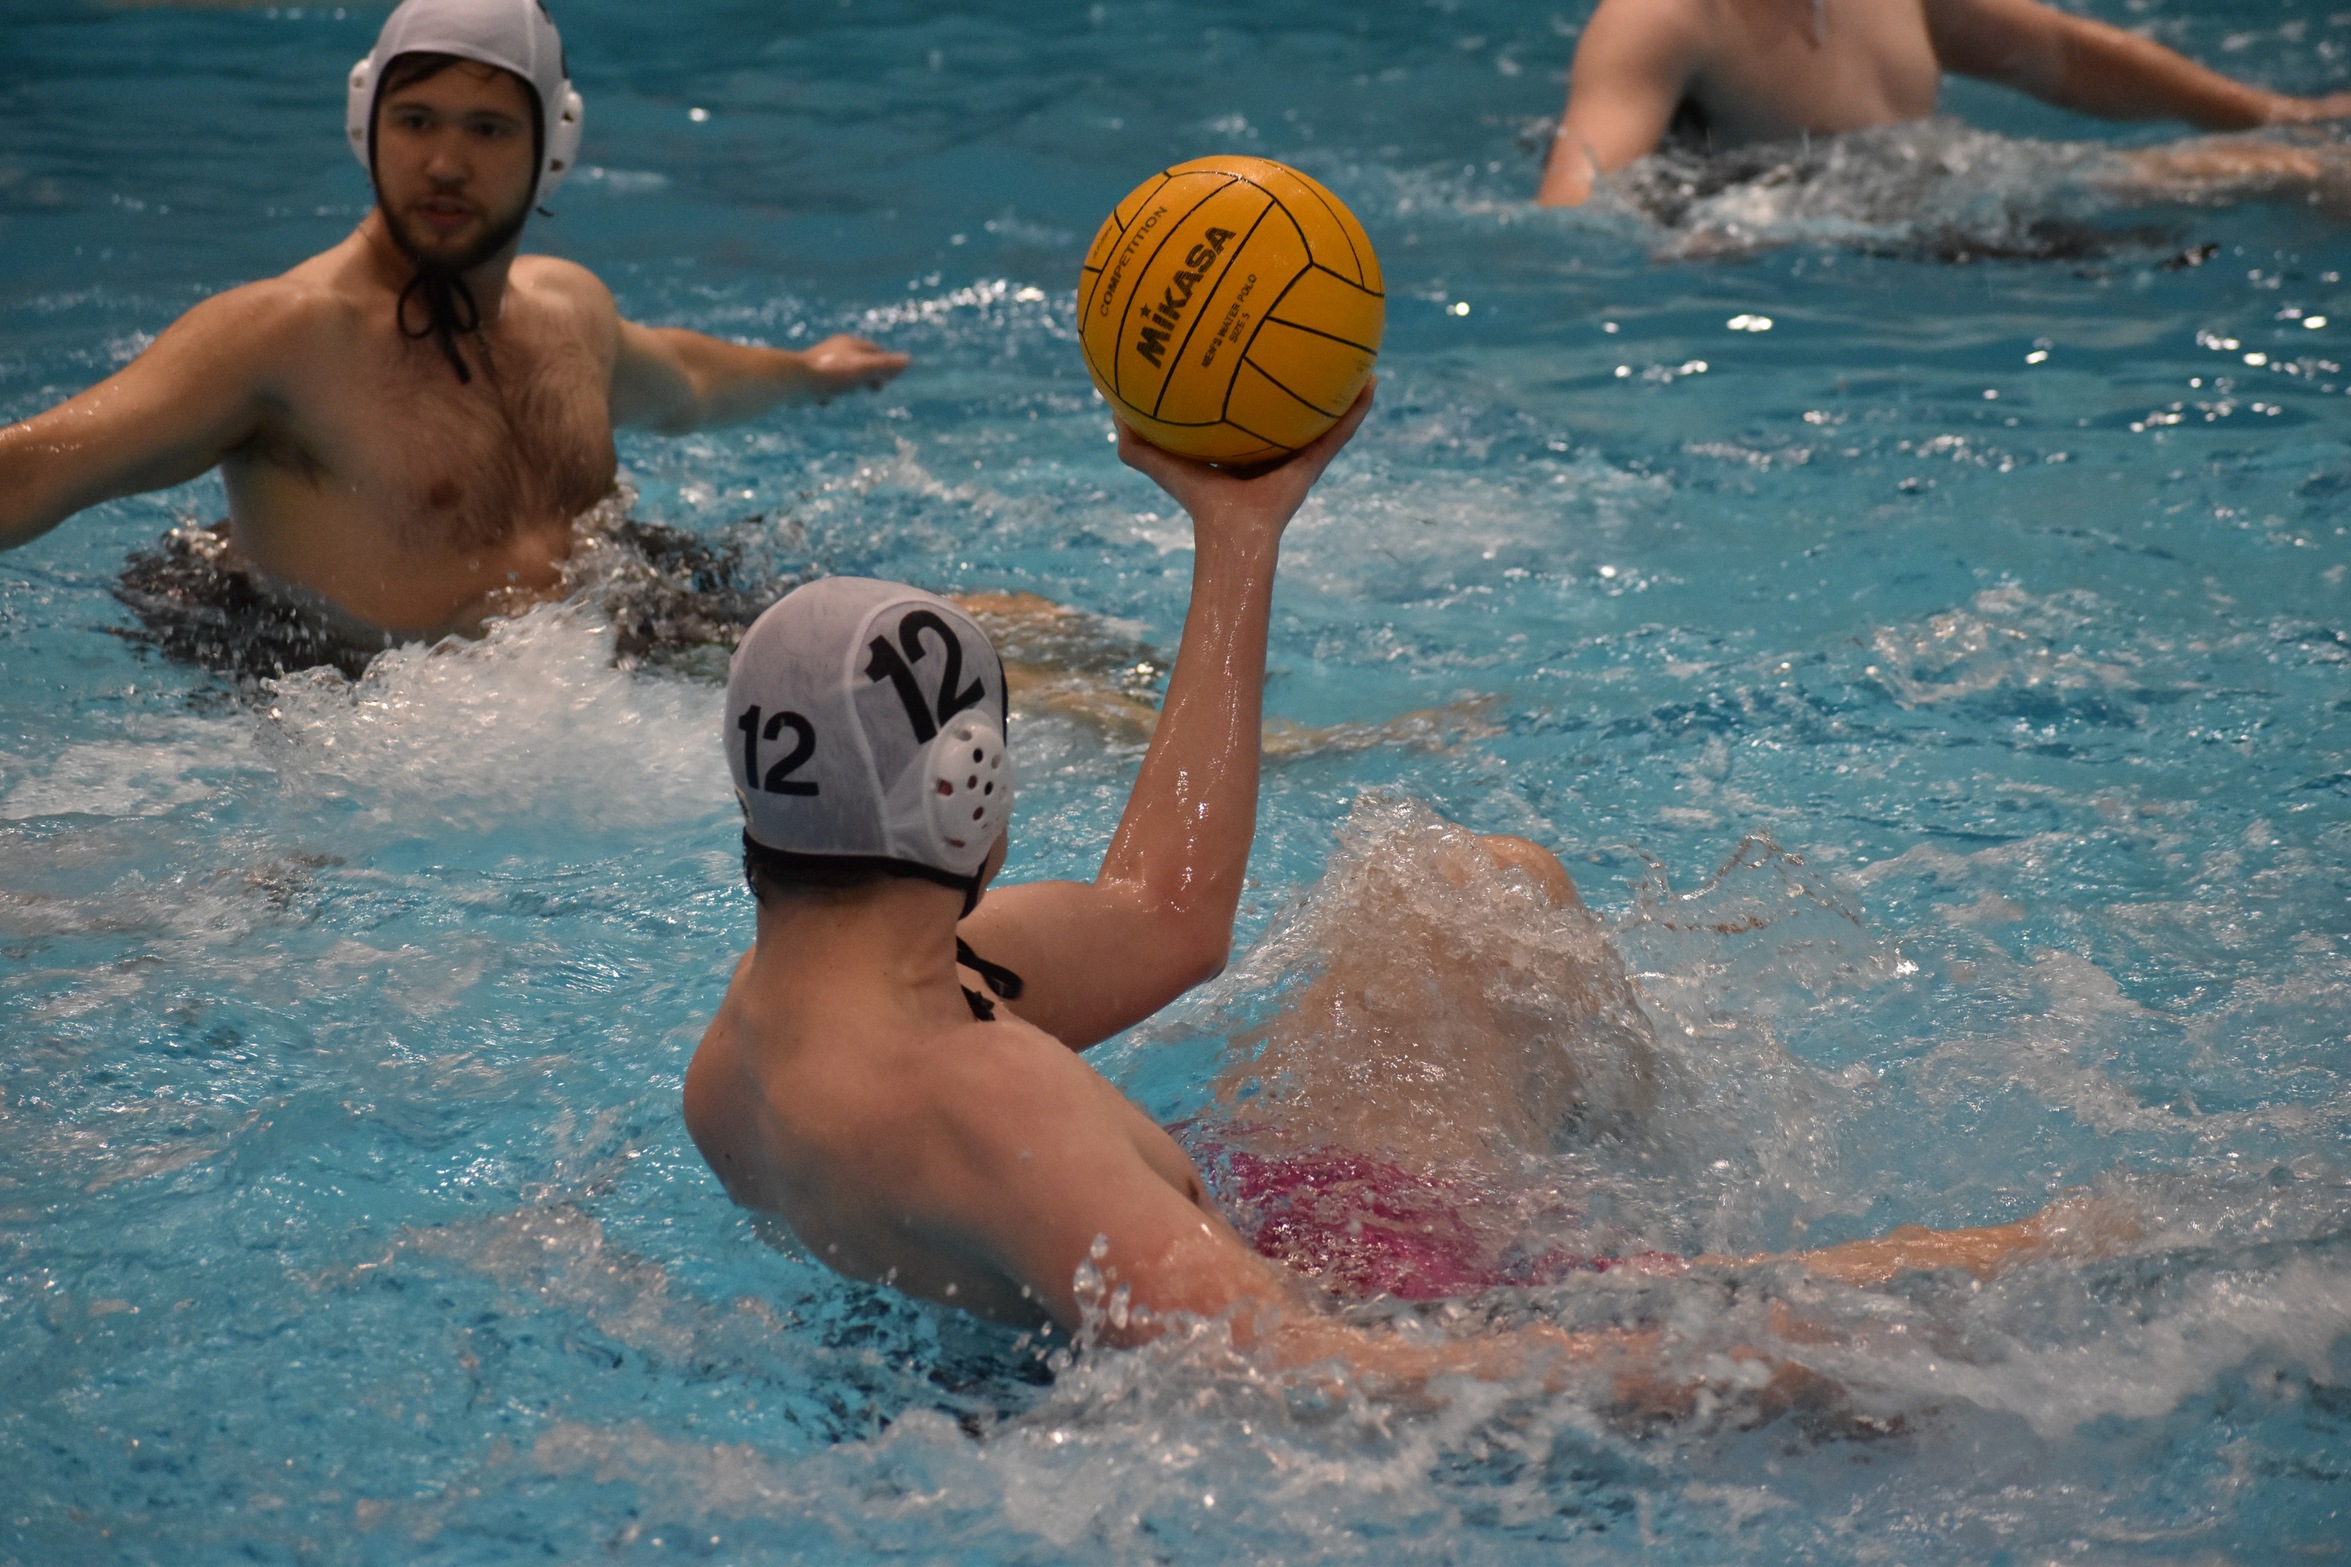 Spring 2023 WaterPolo